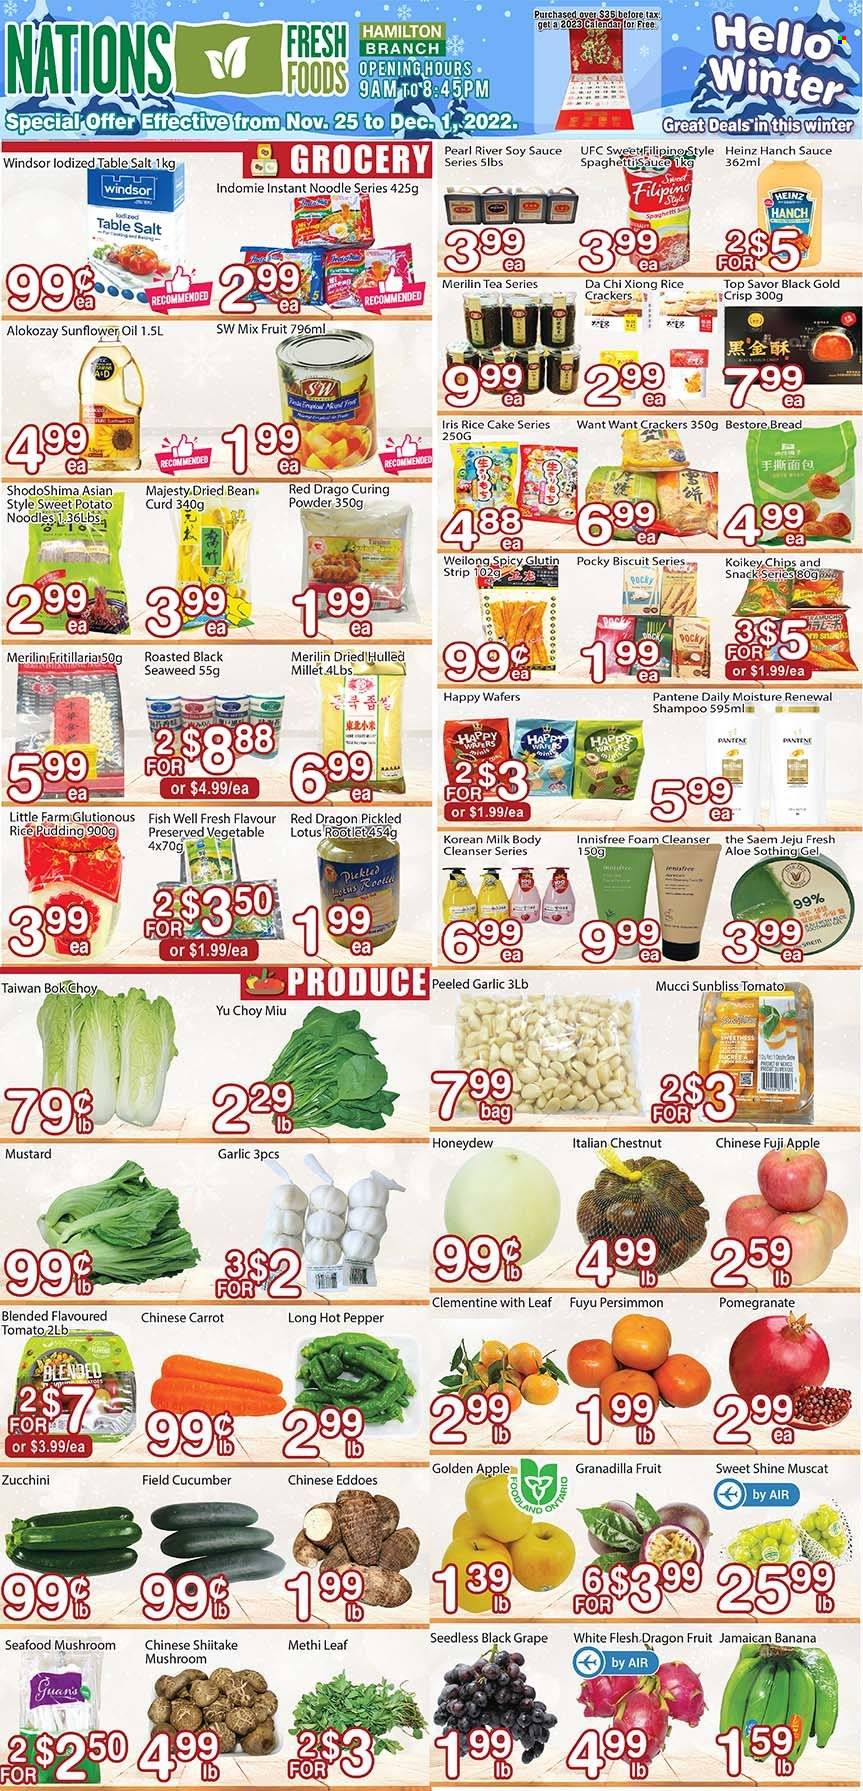 thumbnail - Nations Fresh Foods Flyer - November 25, 2022 - December 01, 2022 - Sales products - mushrooms, bread, bok choy, garlic, sweet potato, zucchini, honeydew, persimmons, Fuji apple, pomegranate, dragon fruit, seafood, fish, spaghetti, sauce, noodles, spaghetti sauce, ham, curd, rice pudding, milk, wafers, snack, crackers, biscuit, chips, seaweed, mustard, soy sauce, sunflower oil, oil, tea, cleanser, shampoo, Heinz, Pantene. Page 1.